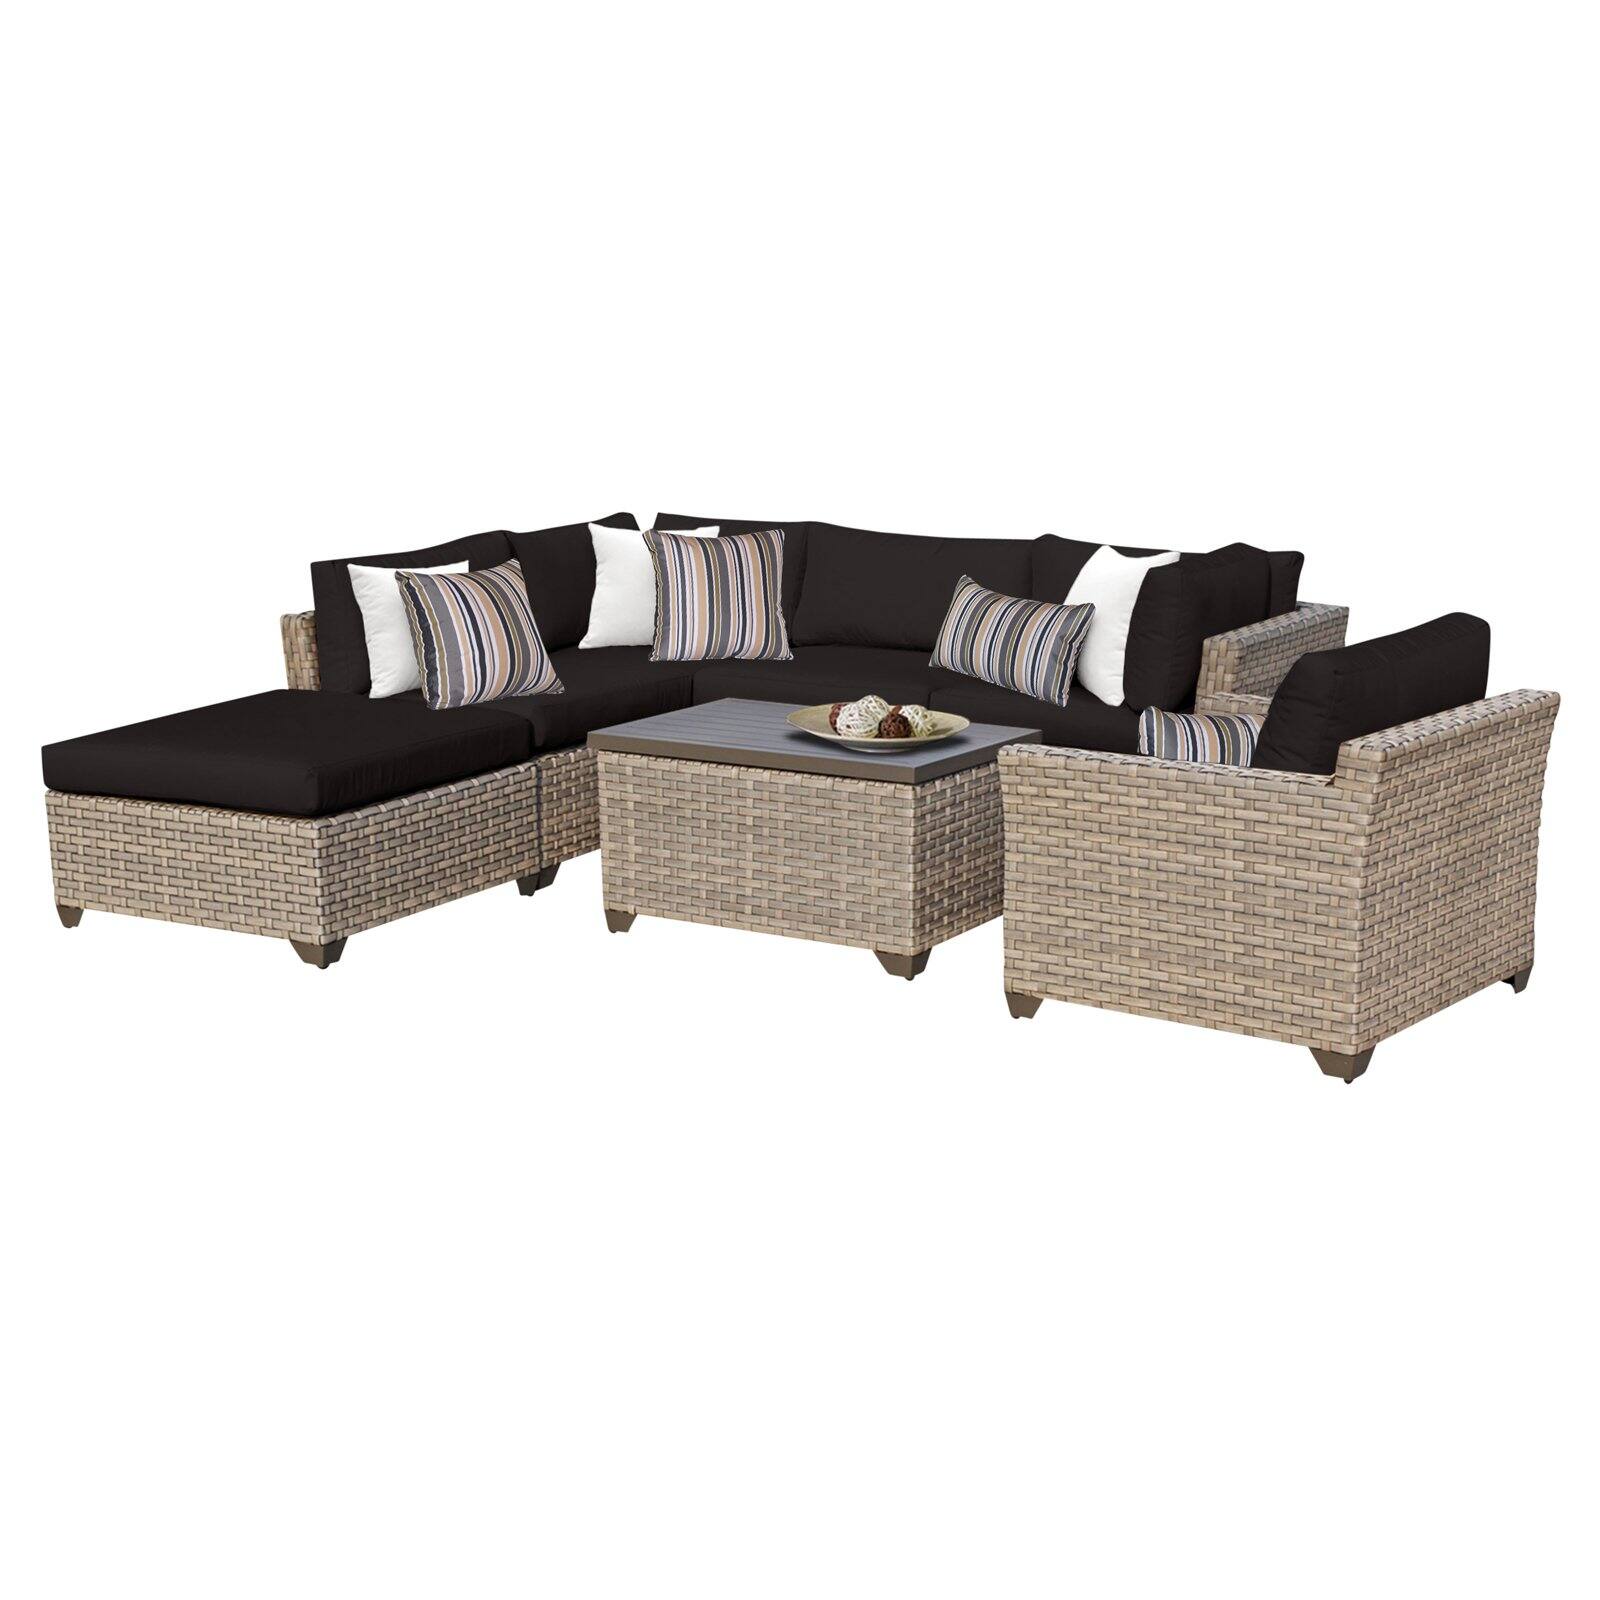 TK Classics Monterey Wicker 7 Piece Patio Conversation Set with Coffee Table and 2 Sets of Cushion Covers - image 1 of 5